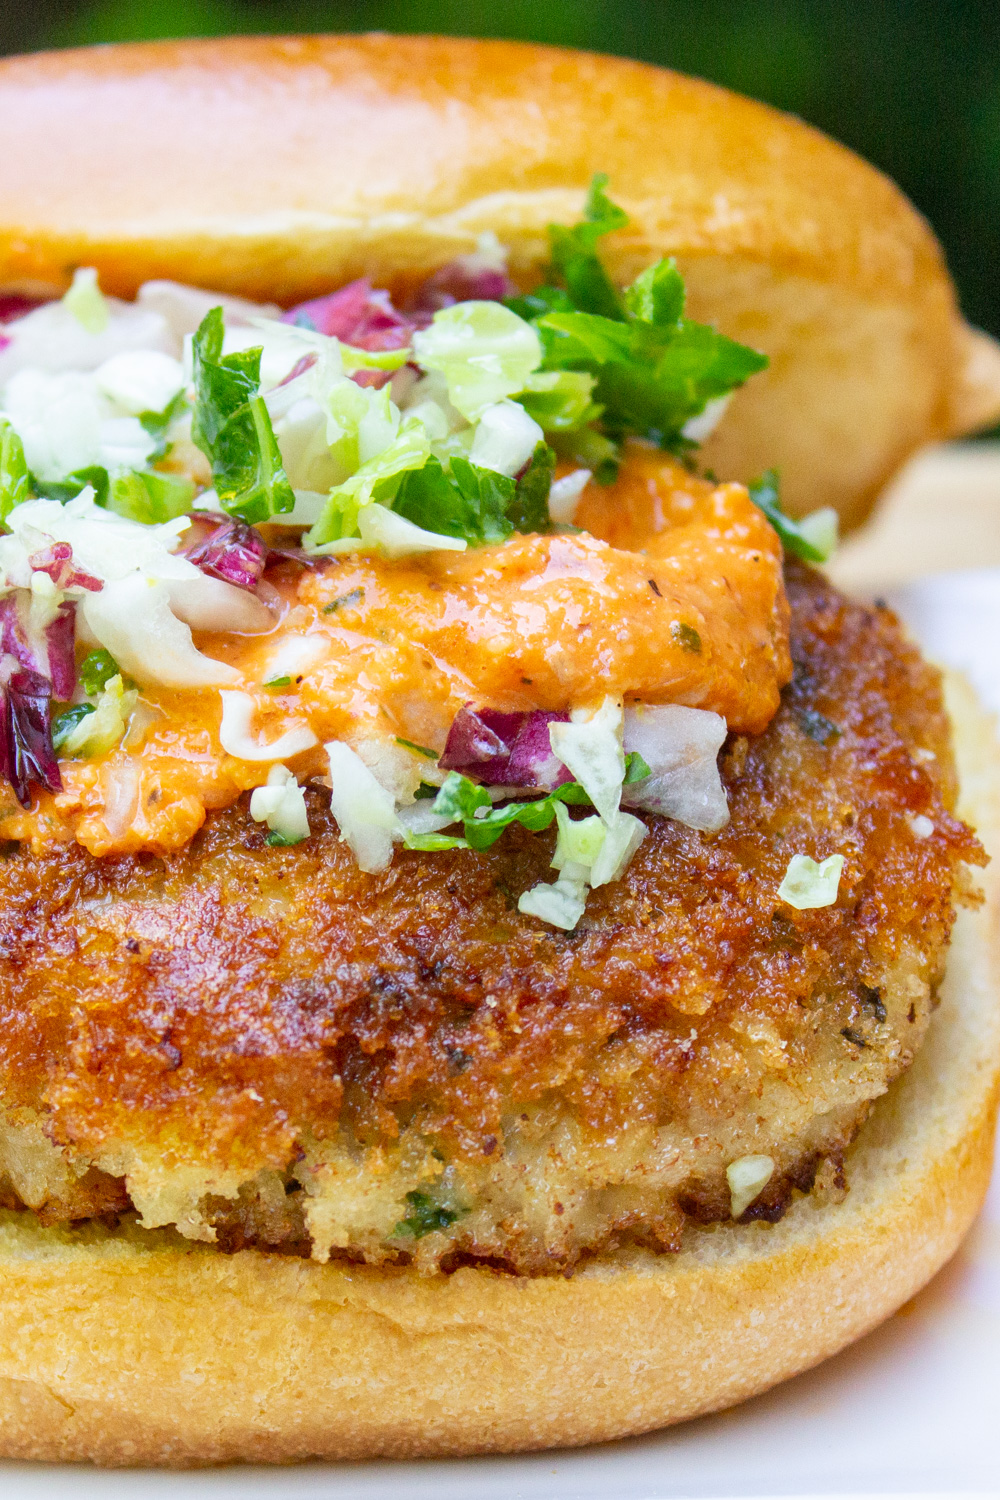 crispy chicken burger on bun with red pepper sauce and coleslaw on top.